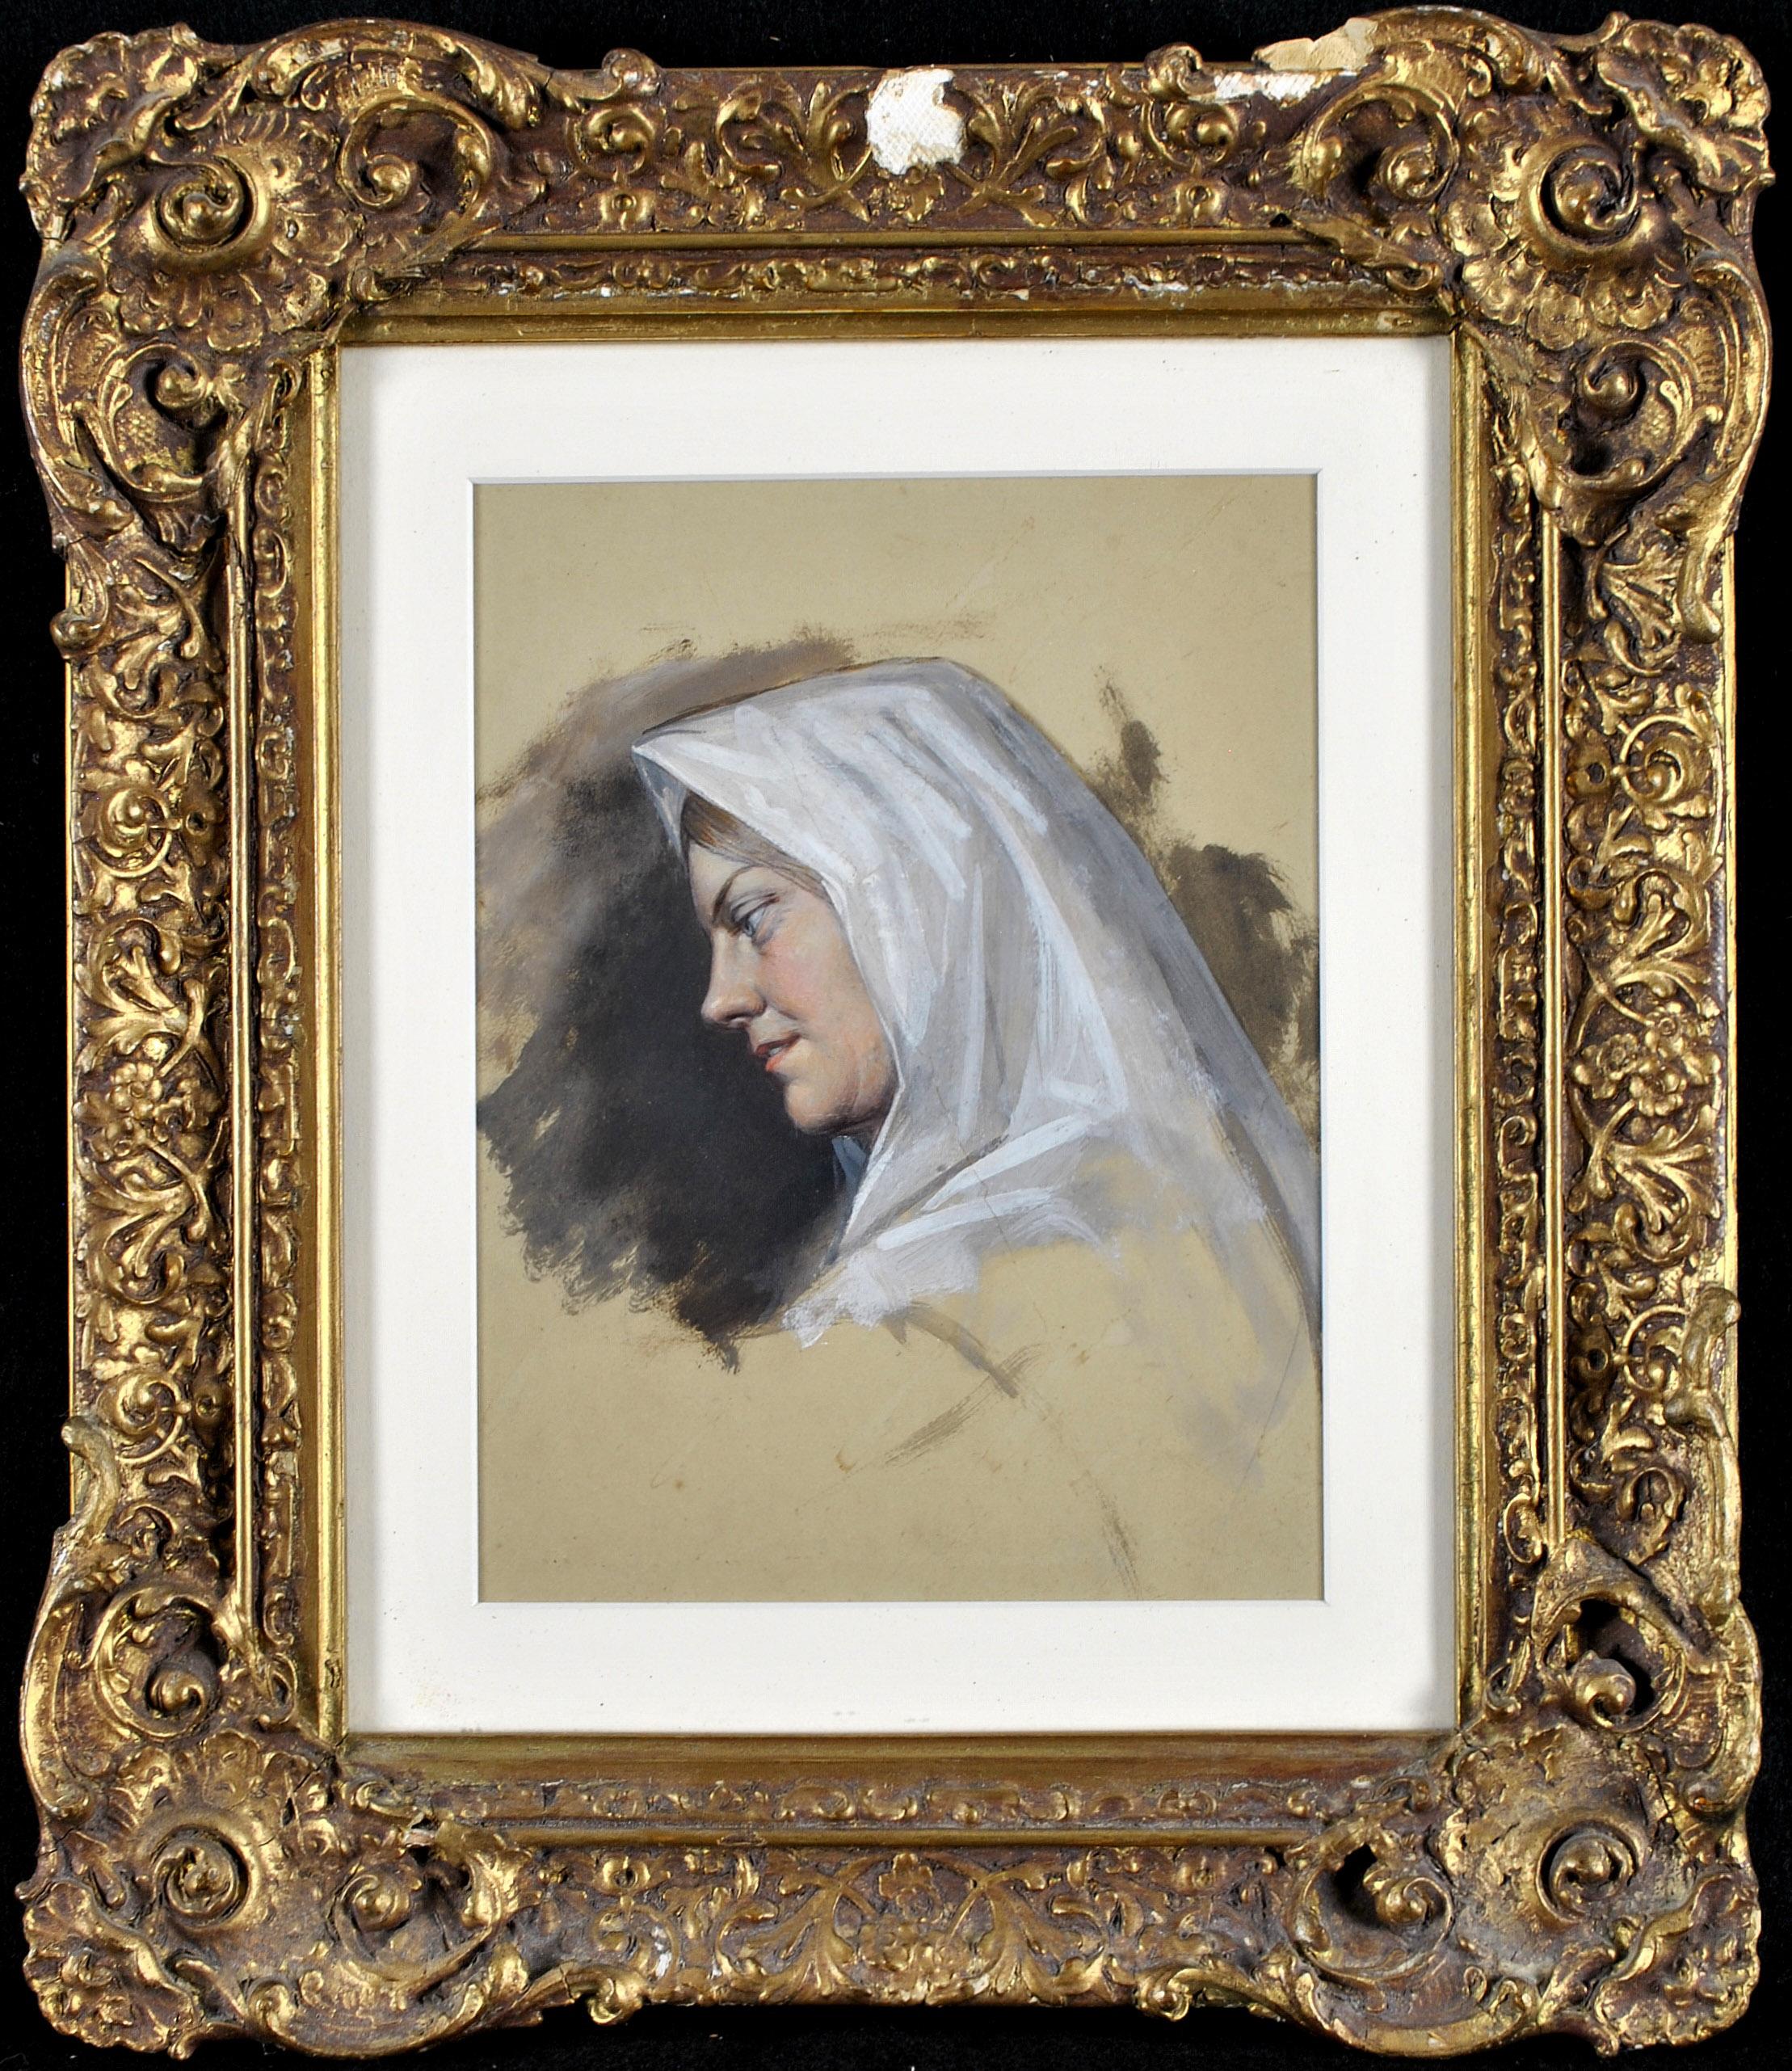 This striking late 19th century gouache on paper depicts a portrait of a young lady in a white shawl. The work is beautifully executed with a splash of colour behind the lady to accentuate her features. Presented in it's original swept gilt